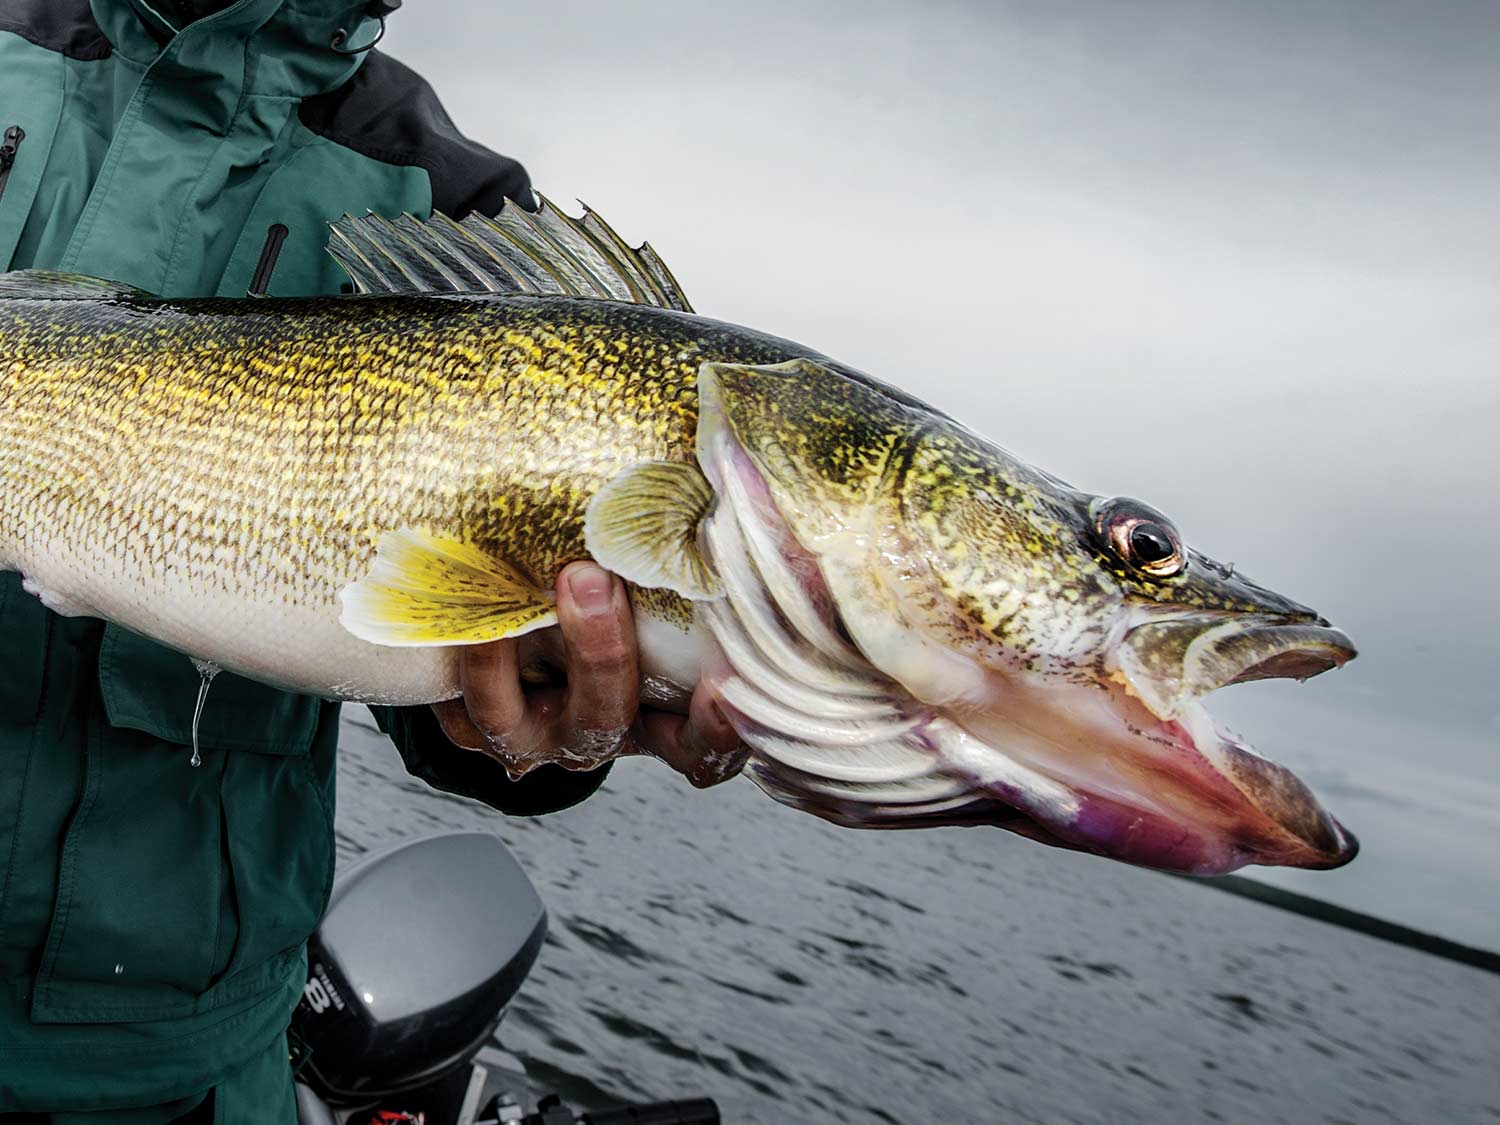 The Best Fishing Line for Walleye in 2022